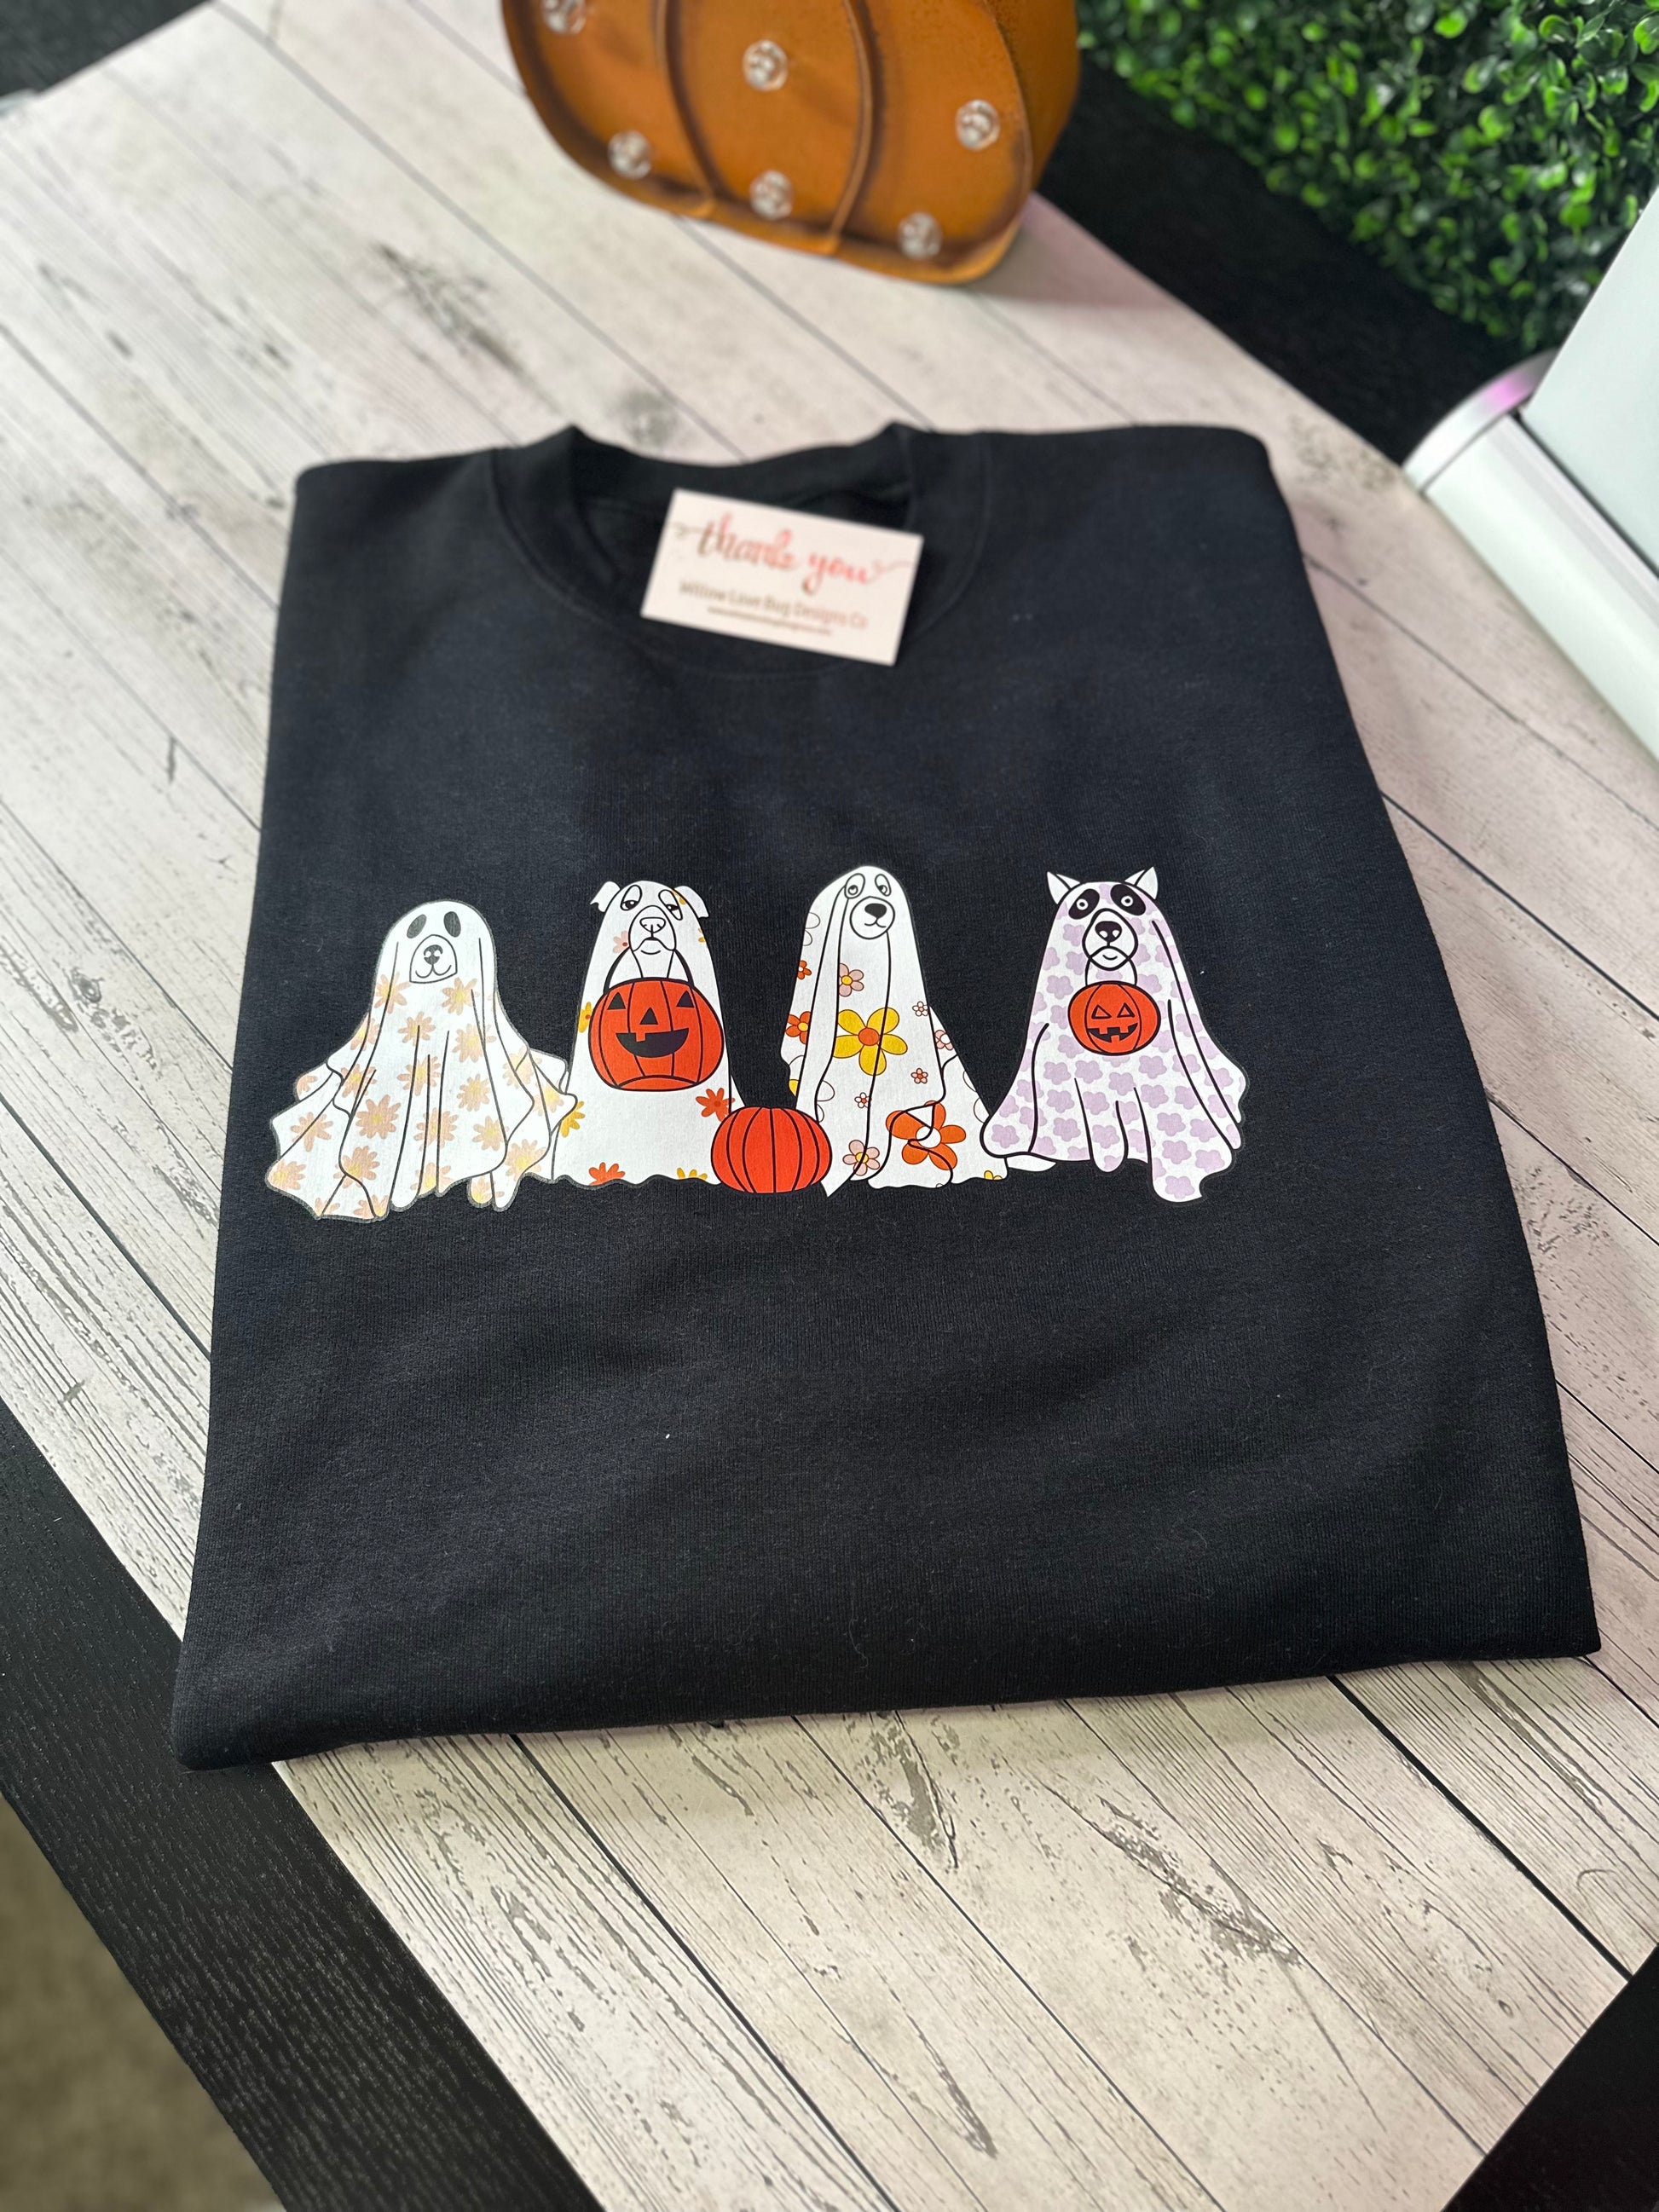 Ghost Dogs Tee or Crewneck - Willow Love Bug Designs 